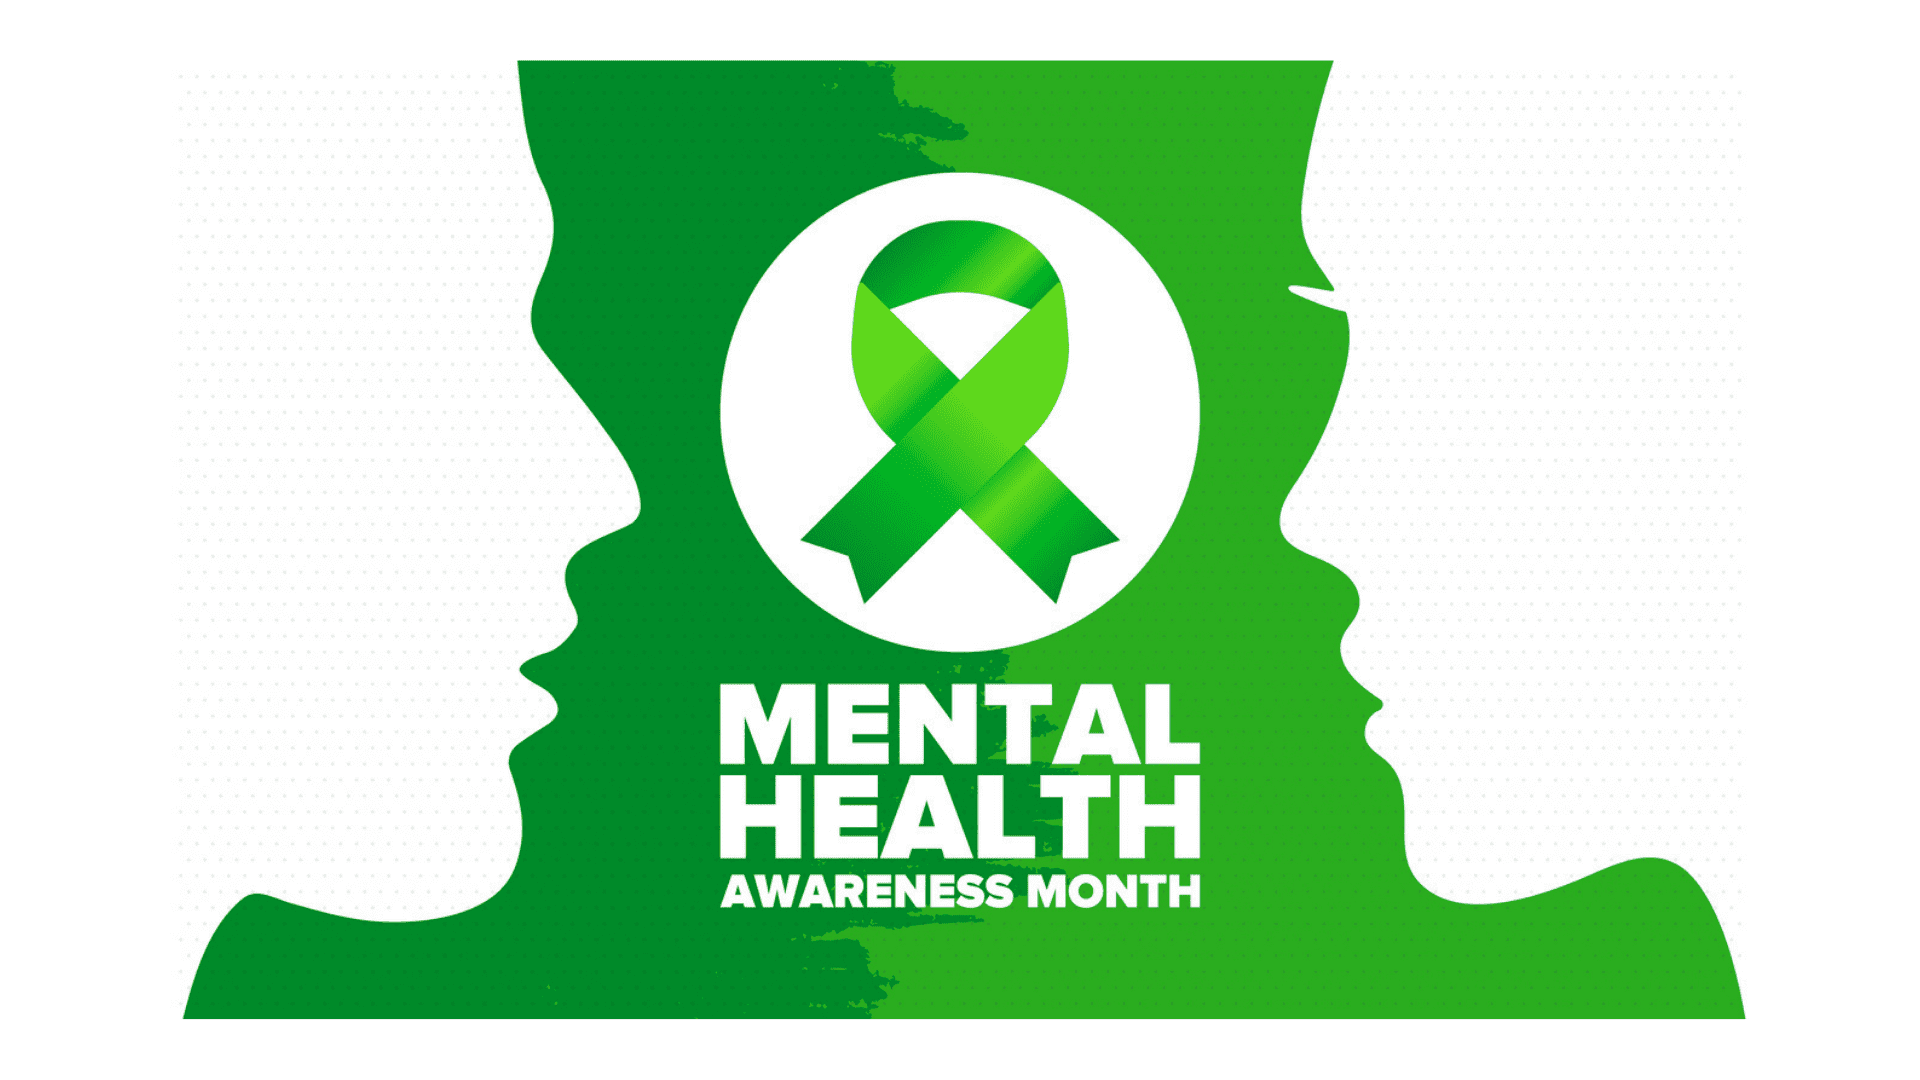 May is Mental Health Month: Raise Awareness, Erase the Stigma, and